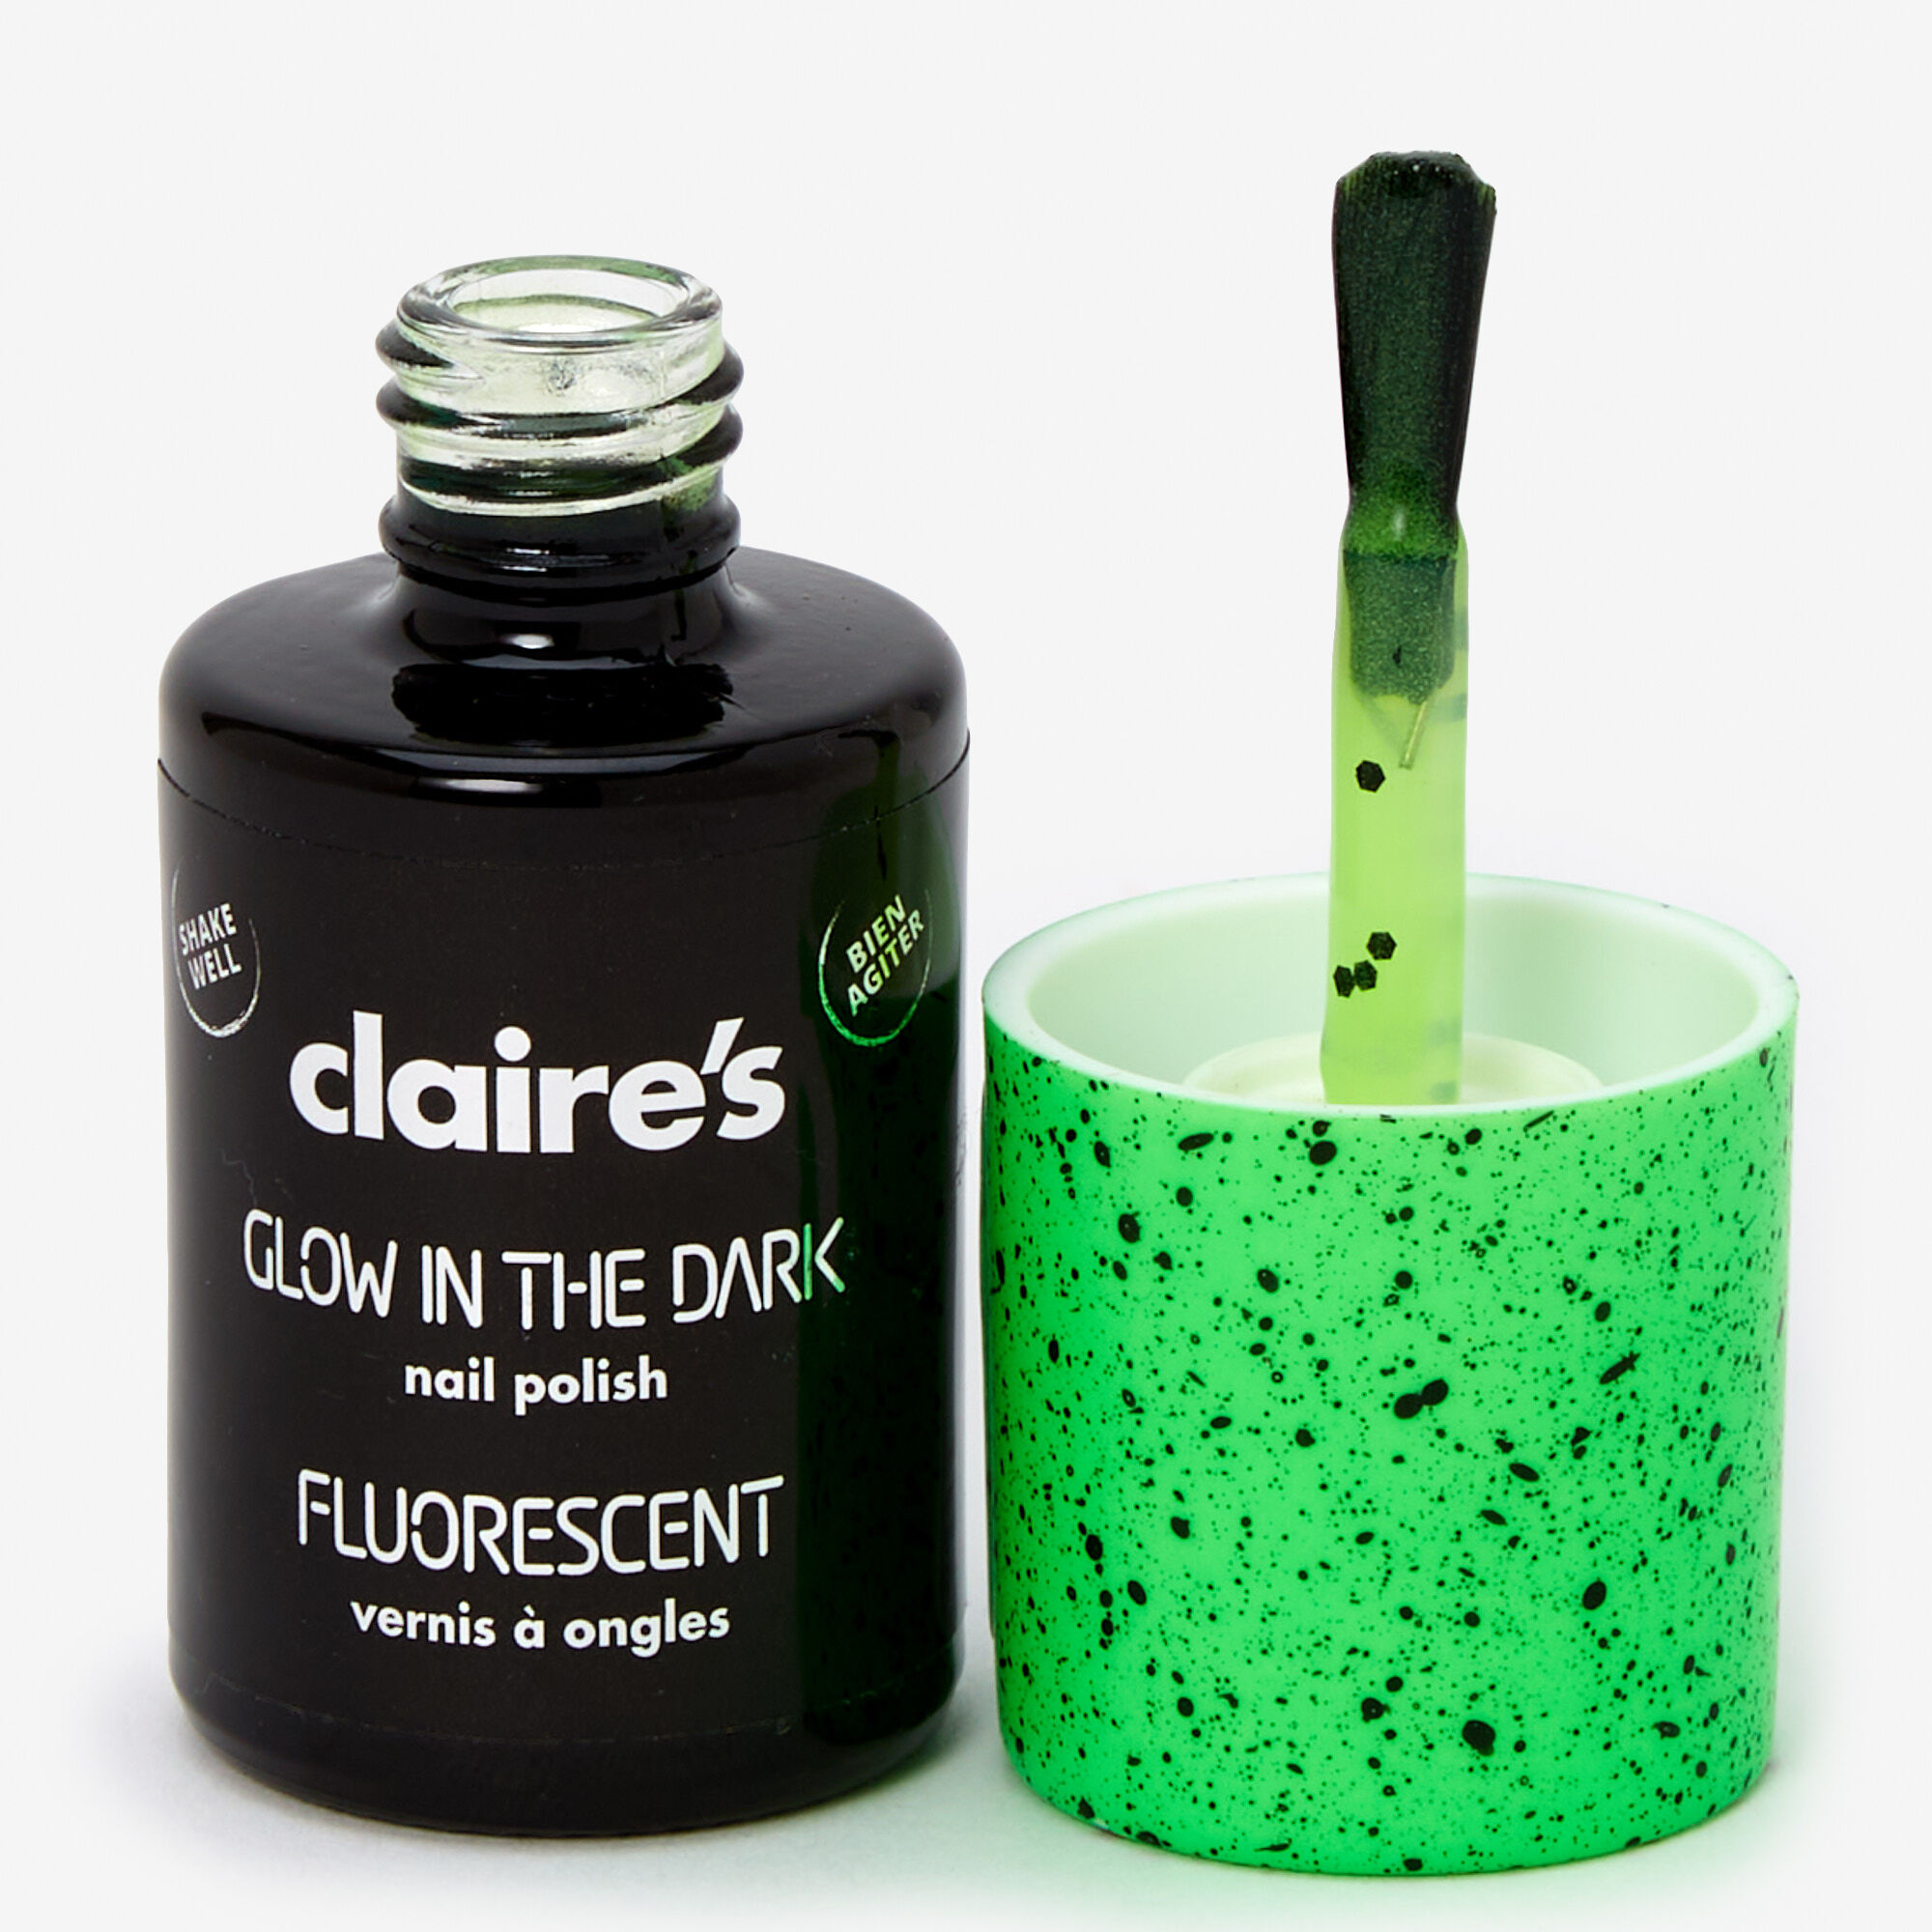 Claire's - Get your glow on with glow-in-the-dark nail polishes! 💫  #MerryAndBright